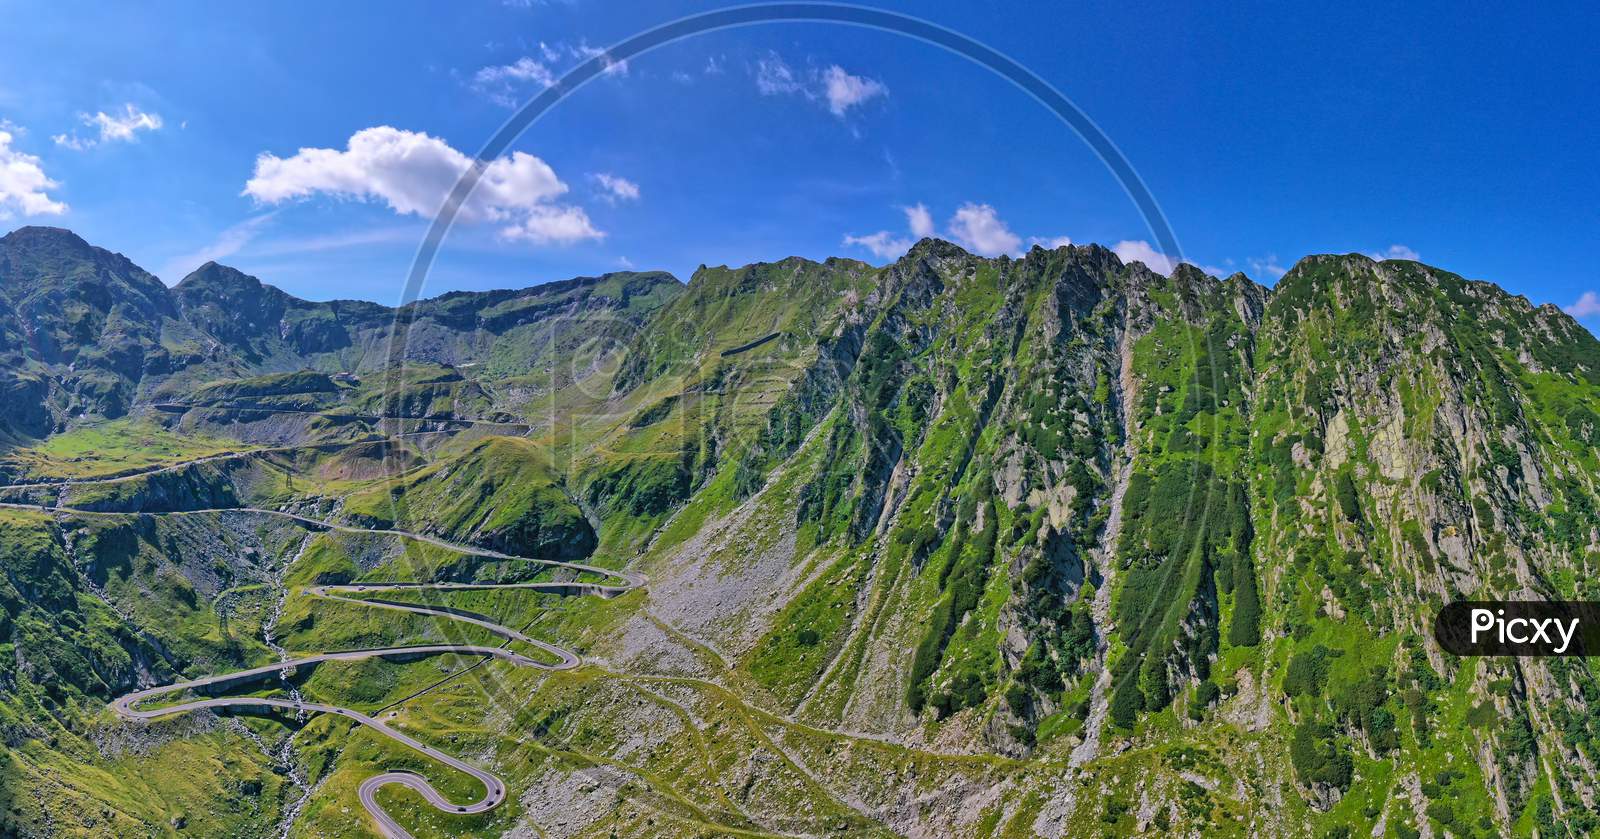 Summer Landscape In Fagaras Mountains, Green Crest And Mountain Road